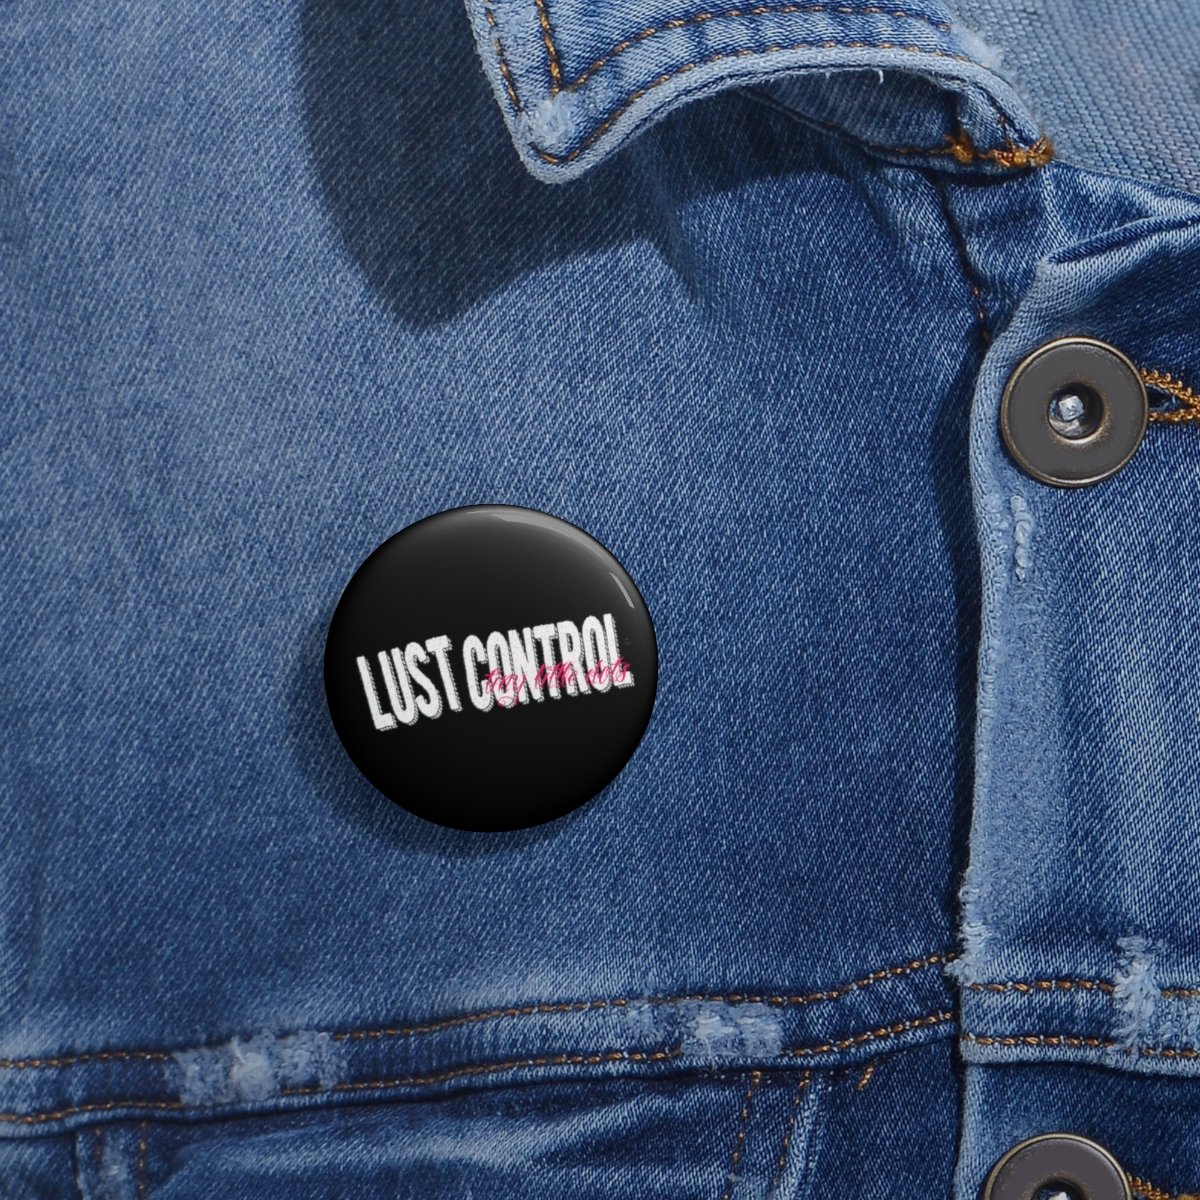 Lust Control – Tiny Little Dots Logo Pin Buttons